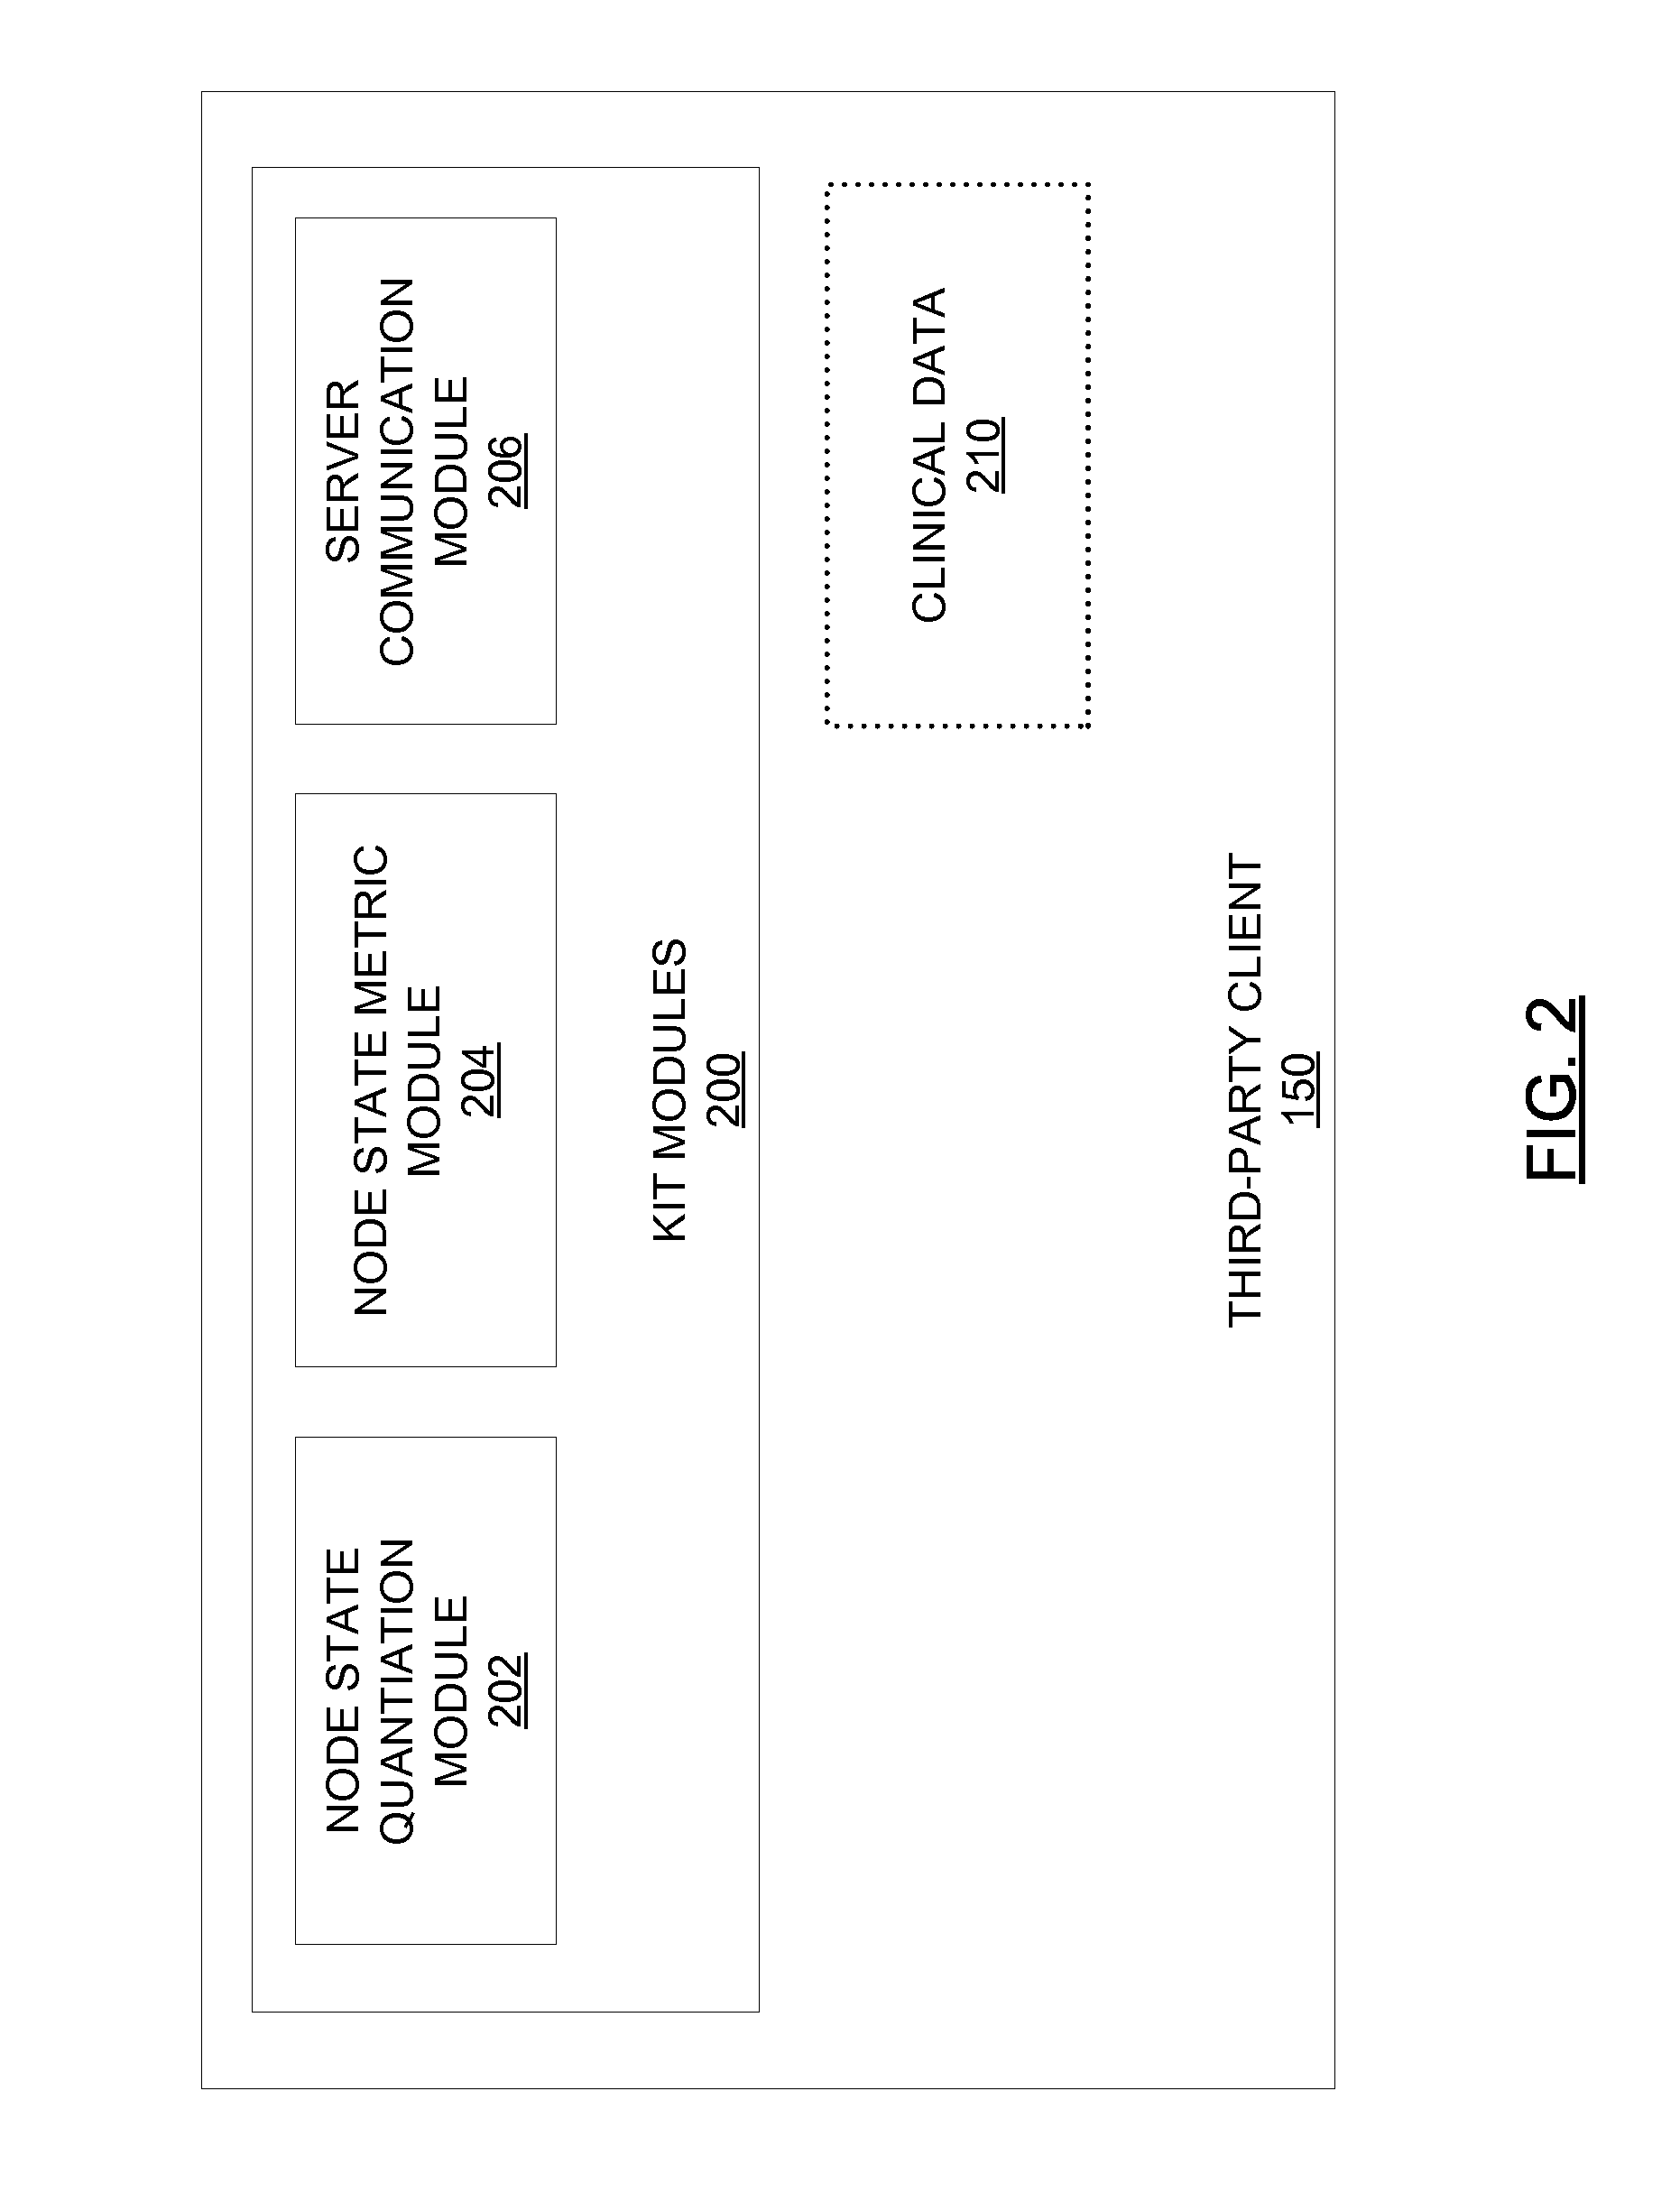 Methods for diagnosis, prognosis and treatment